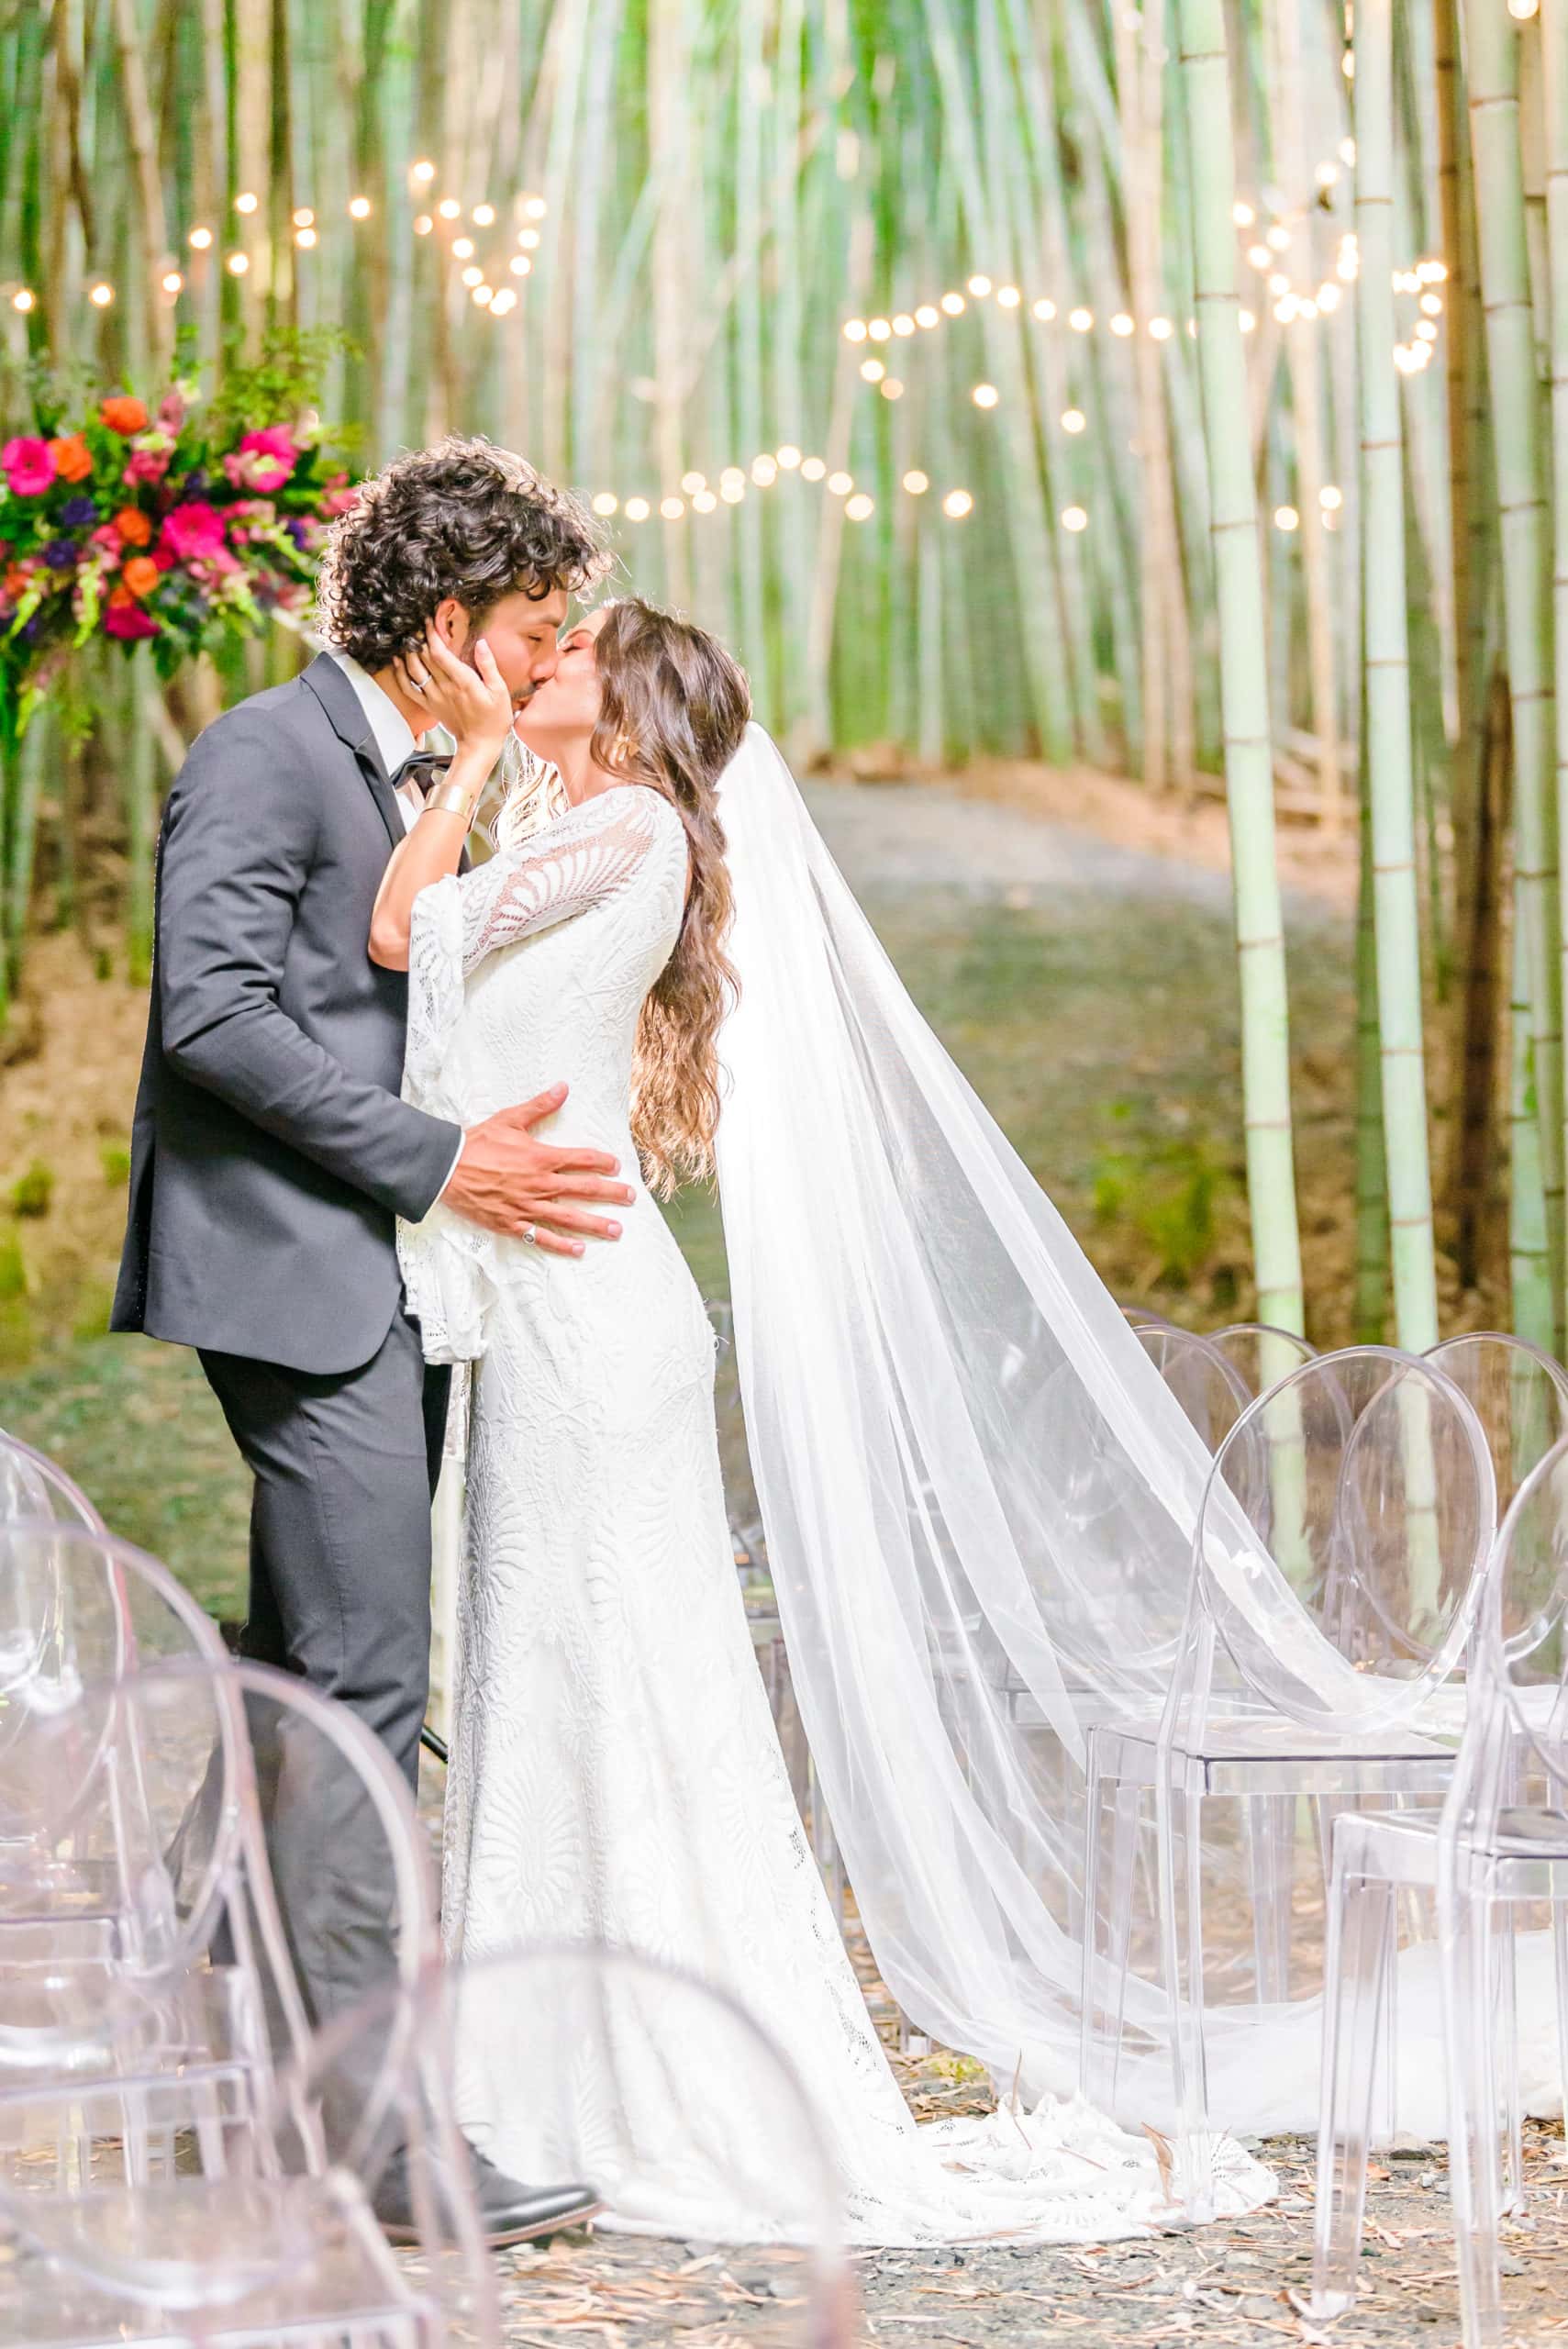 Kaelyn and Trevor kiss as this Belmont wedding venue's bamboo forest stretches behind them, strung with lights.